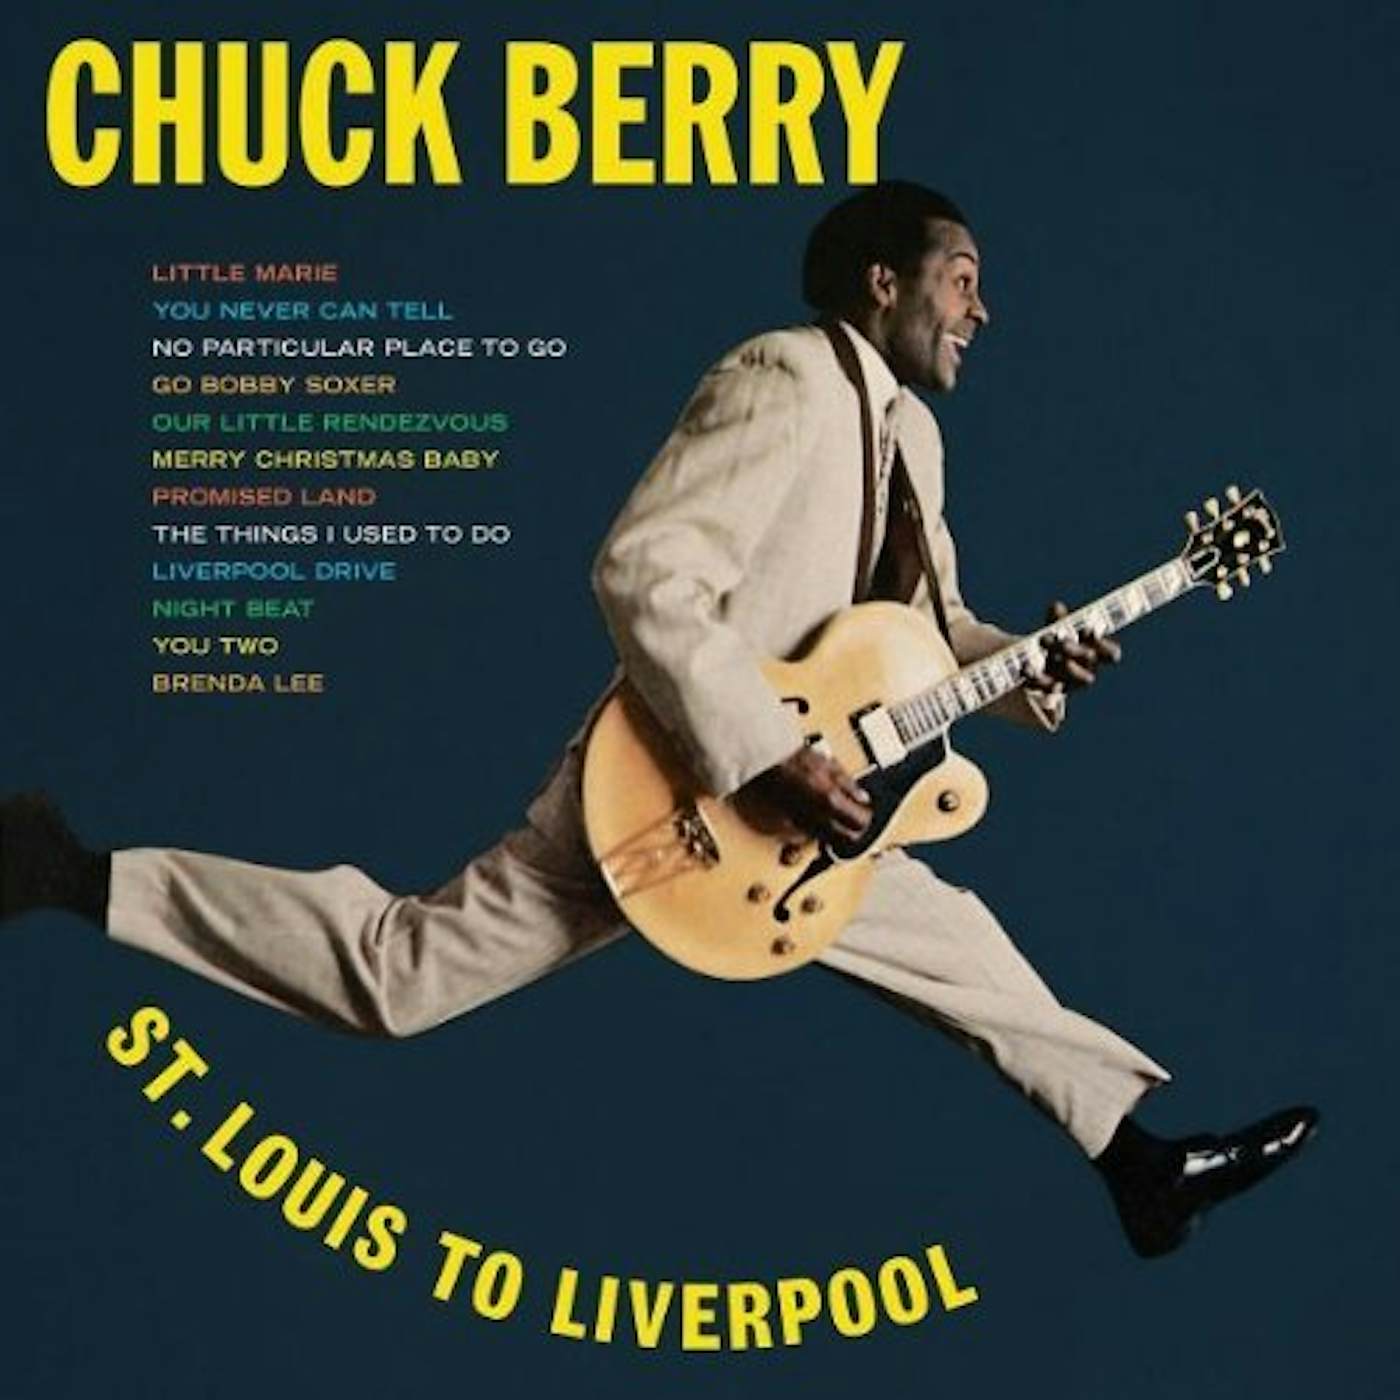 Chuck Berry ST LOUIS TO LIVERPOOL CD